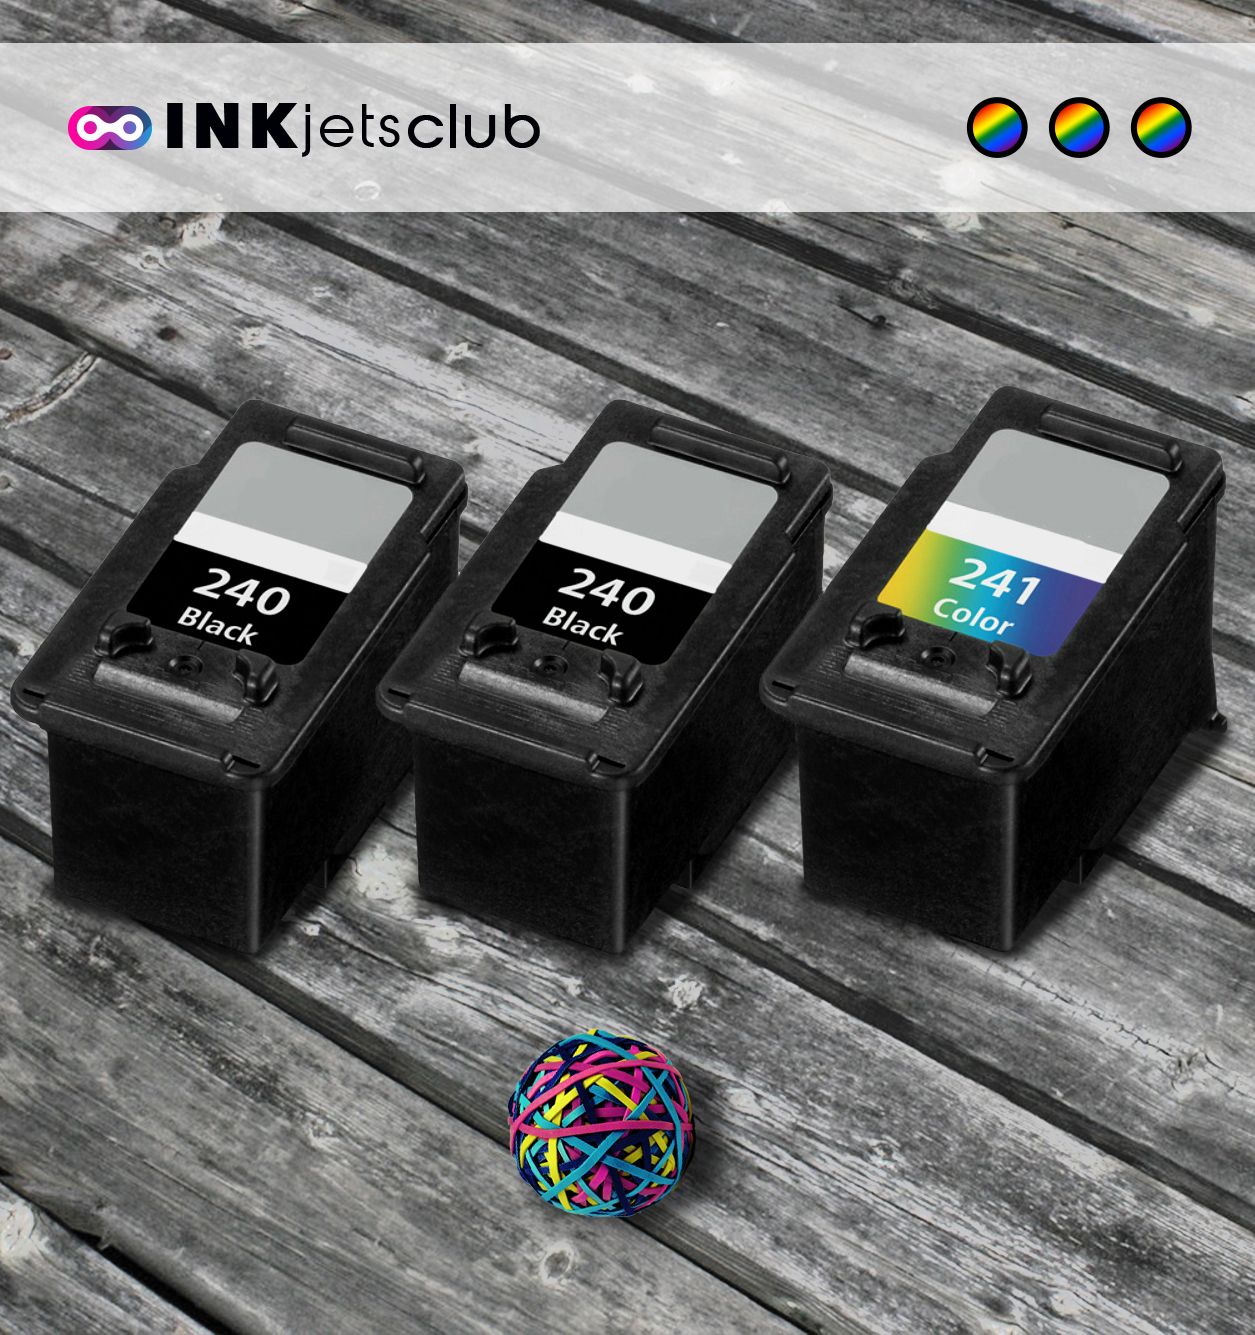 More Prints with Canon PG-240  CL-241 Compatible Ink InkjetsClub